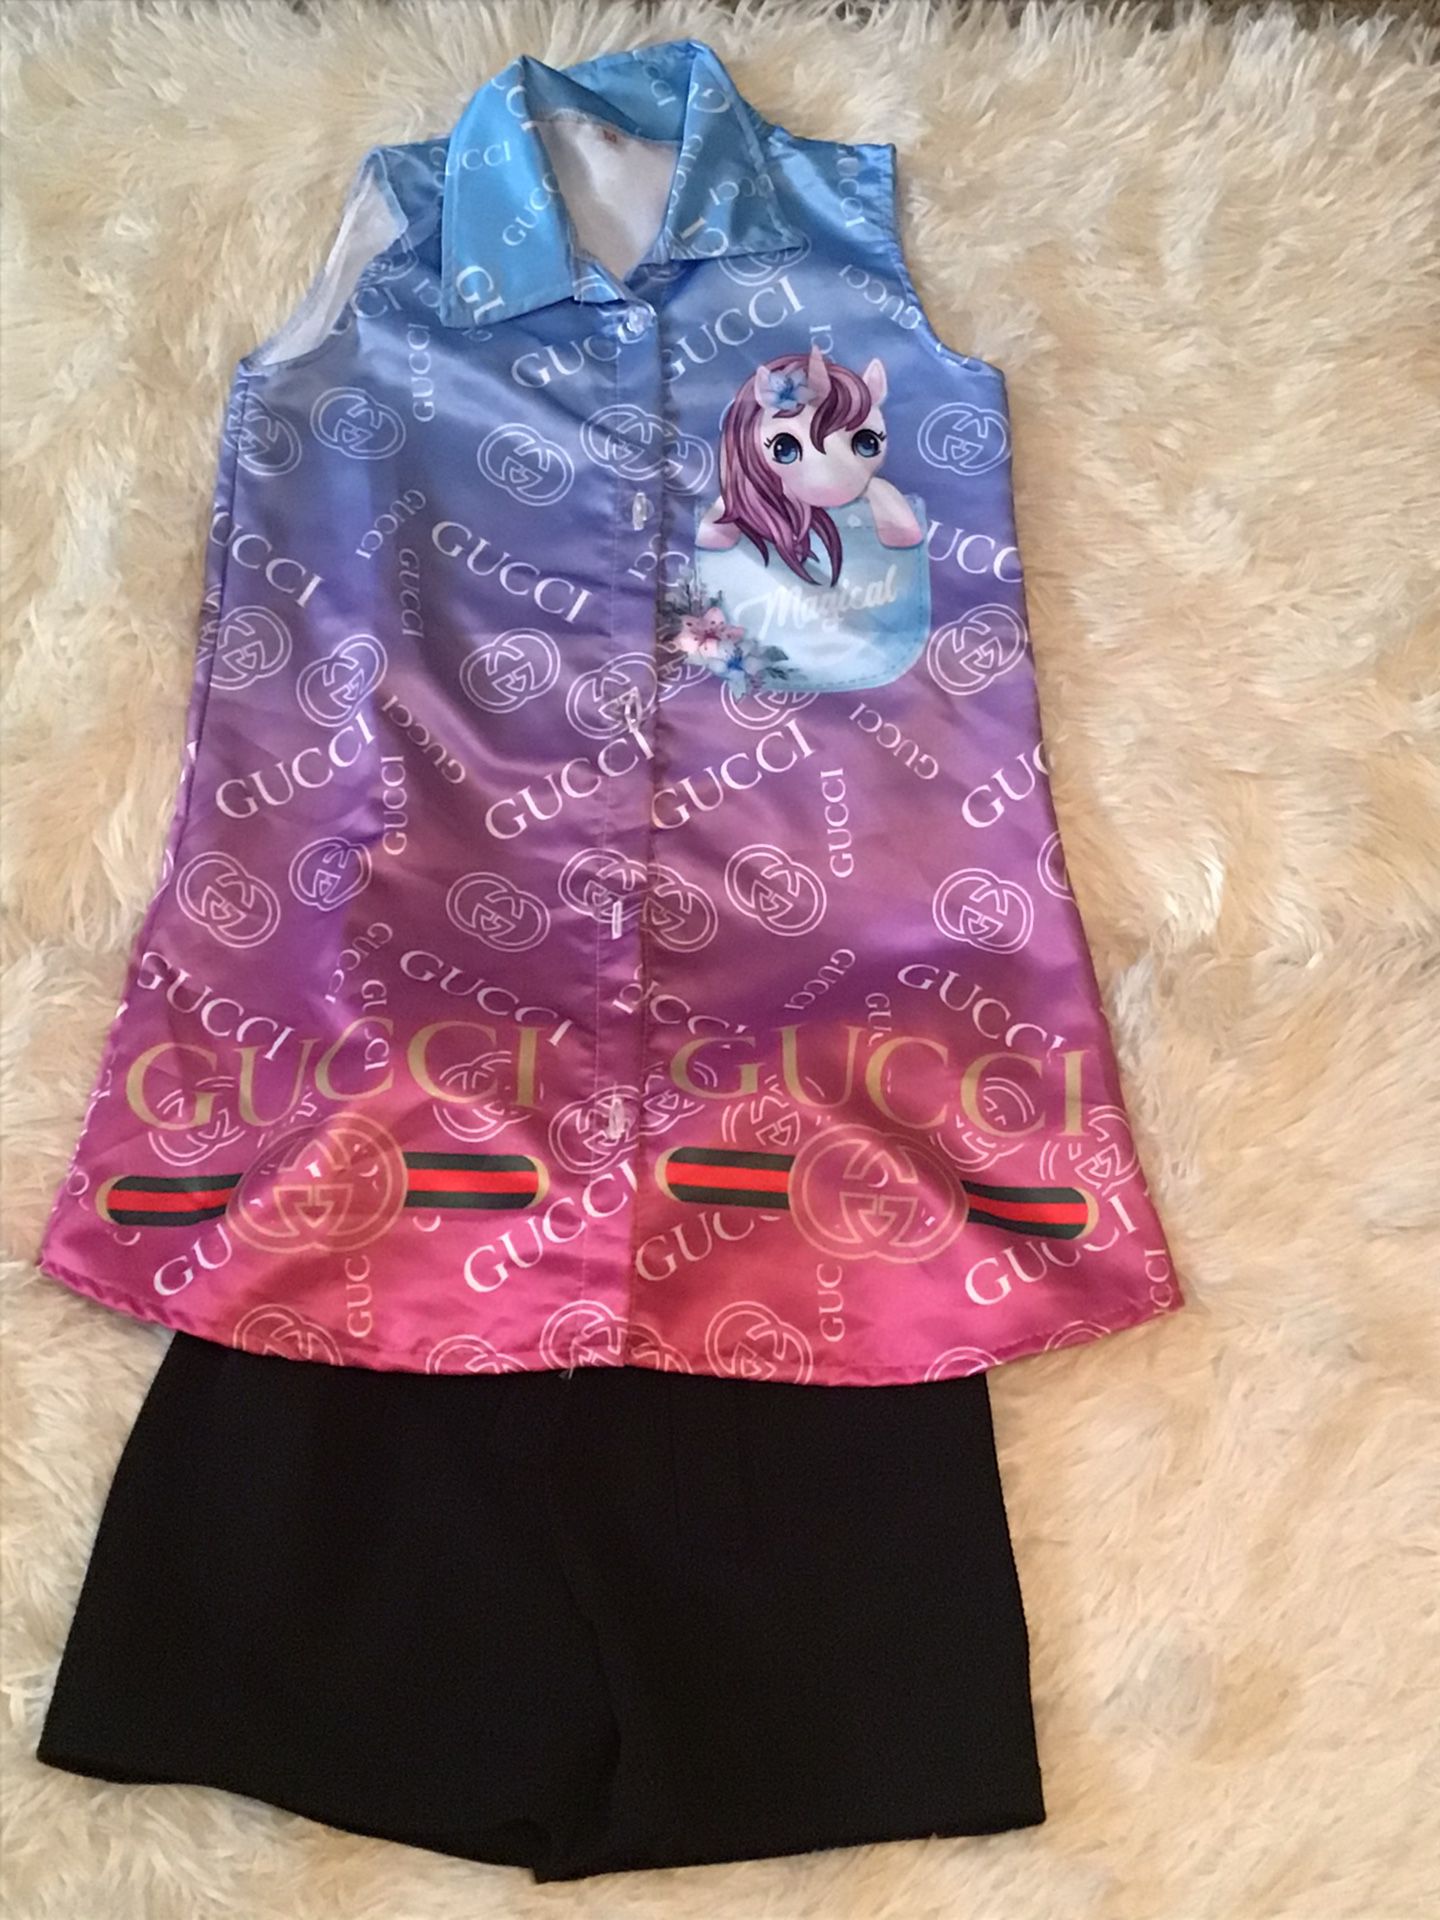 Very Pretty Unicorn 2 Pc.Set Shorts And Shirt $18 Each Set   ( Available In  Med 4-6 ) Handmade